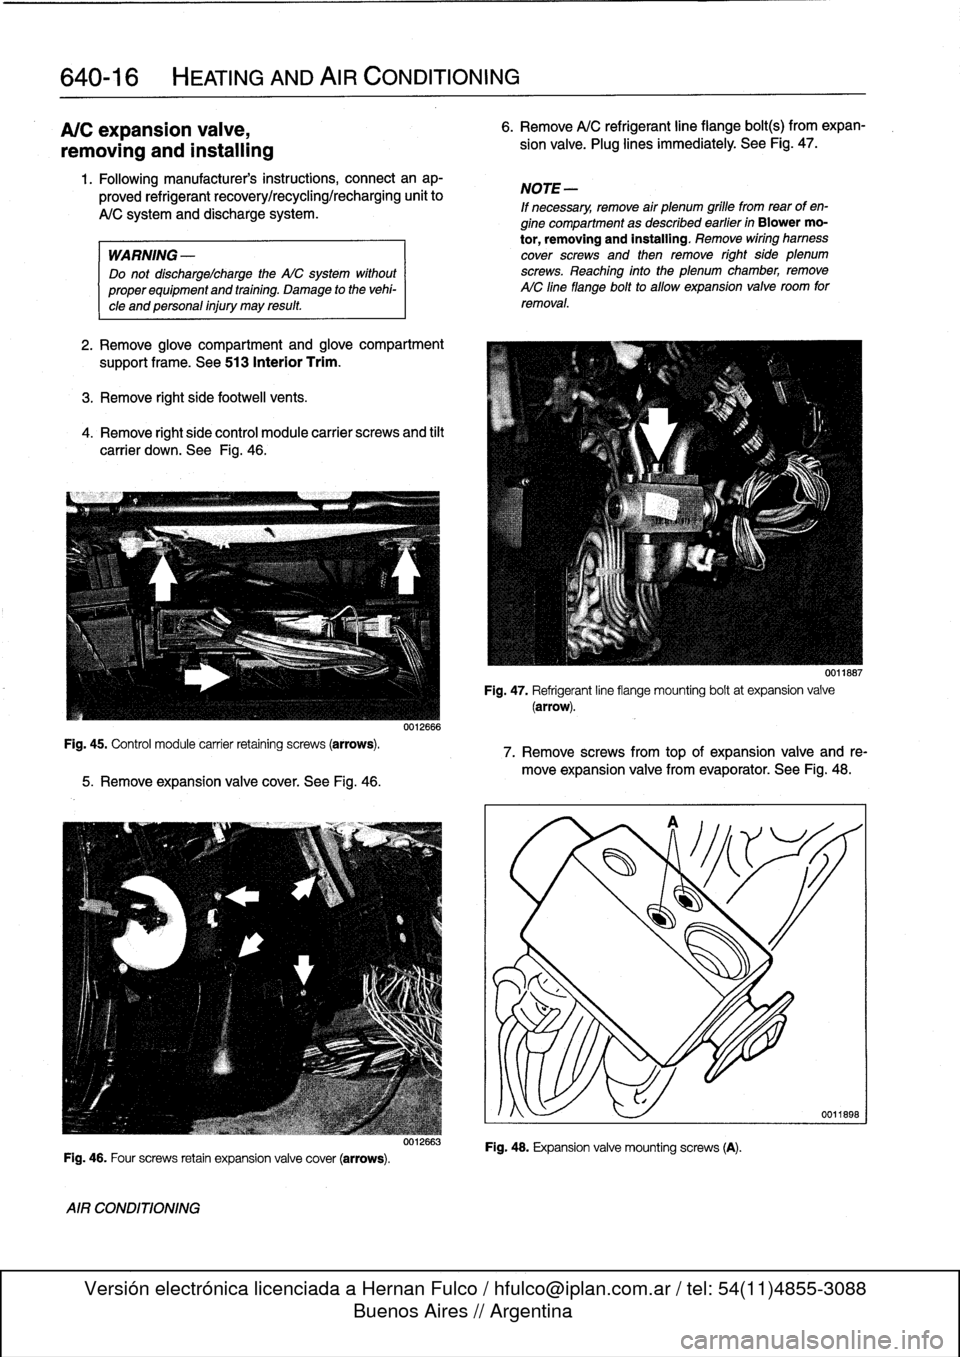 BMW M3 1994 E36 Owners Manual 
640-16

	

HEATING
AND
AIR
CONDITIONING

A/C
expansion
valve,

removing
and
installing

Fig
.
45
.
Control
module
carrier
retaining
screws
(arrows)
.

1
.
Following
manufacturers
instructions,
connec